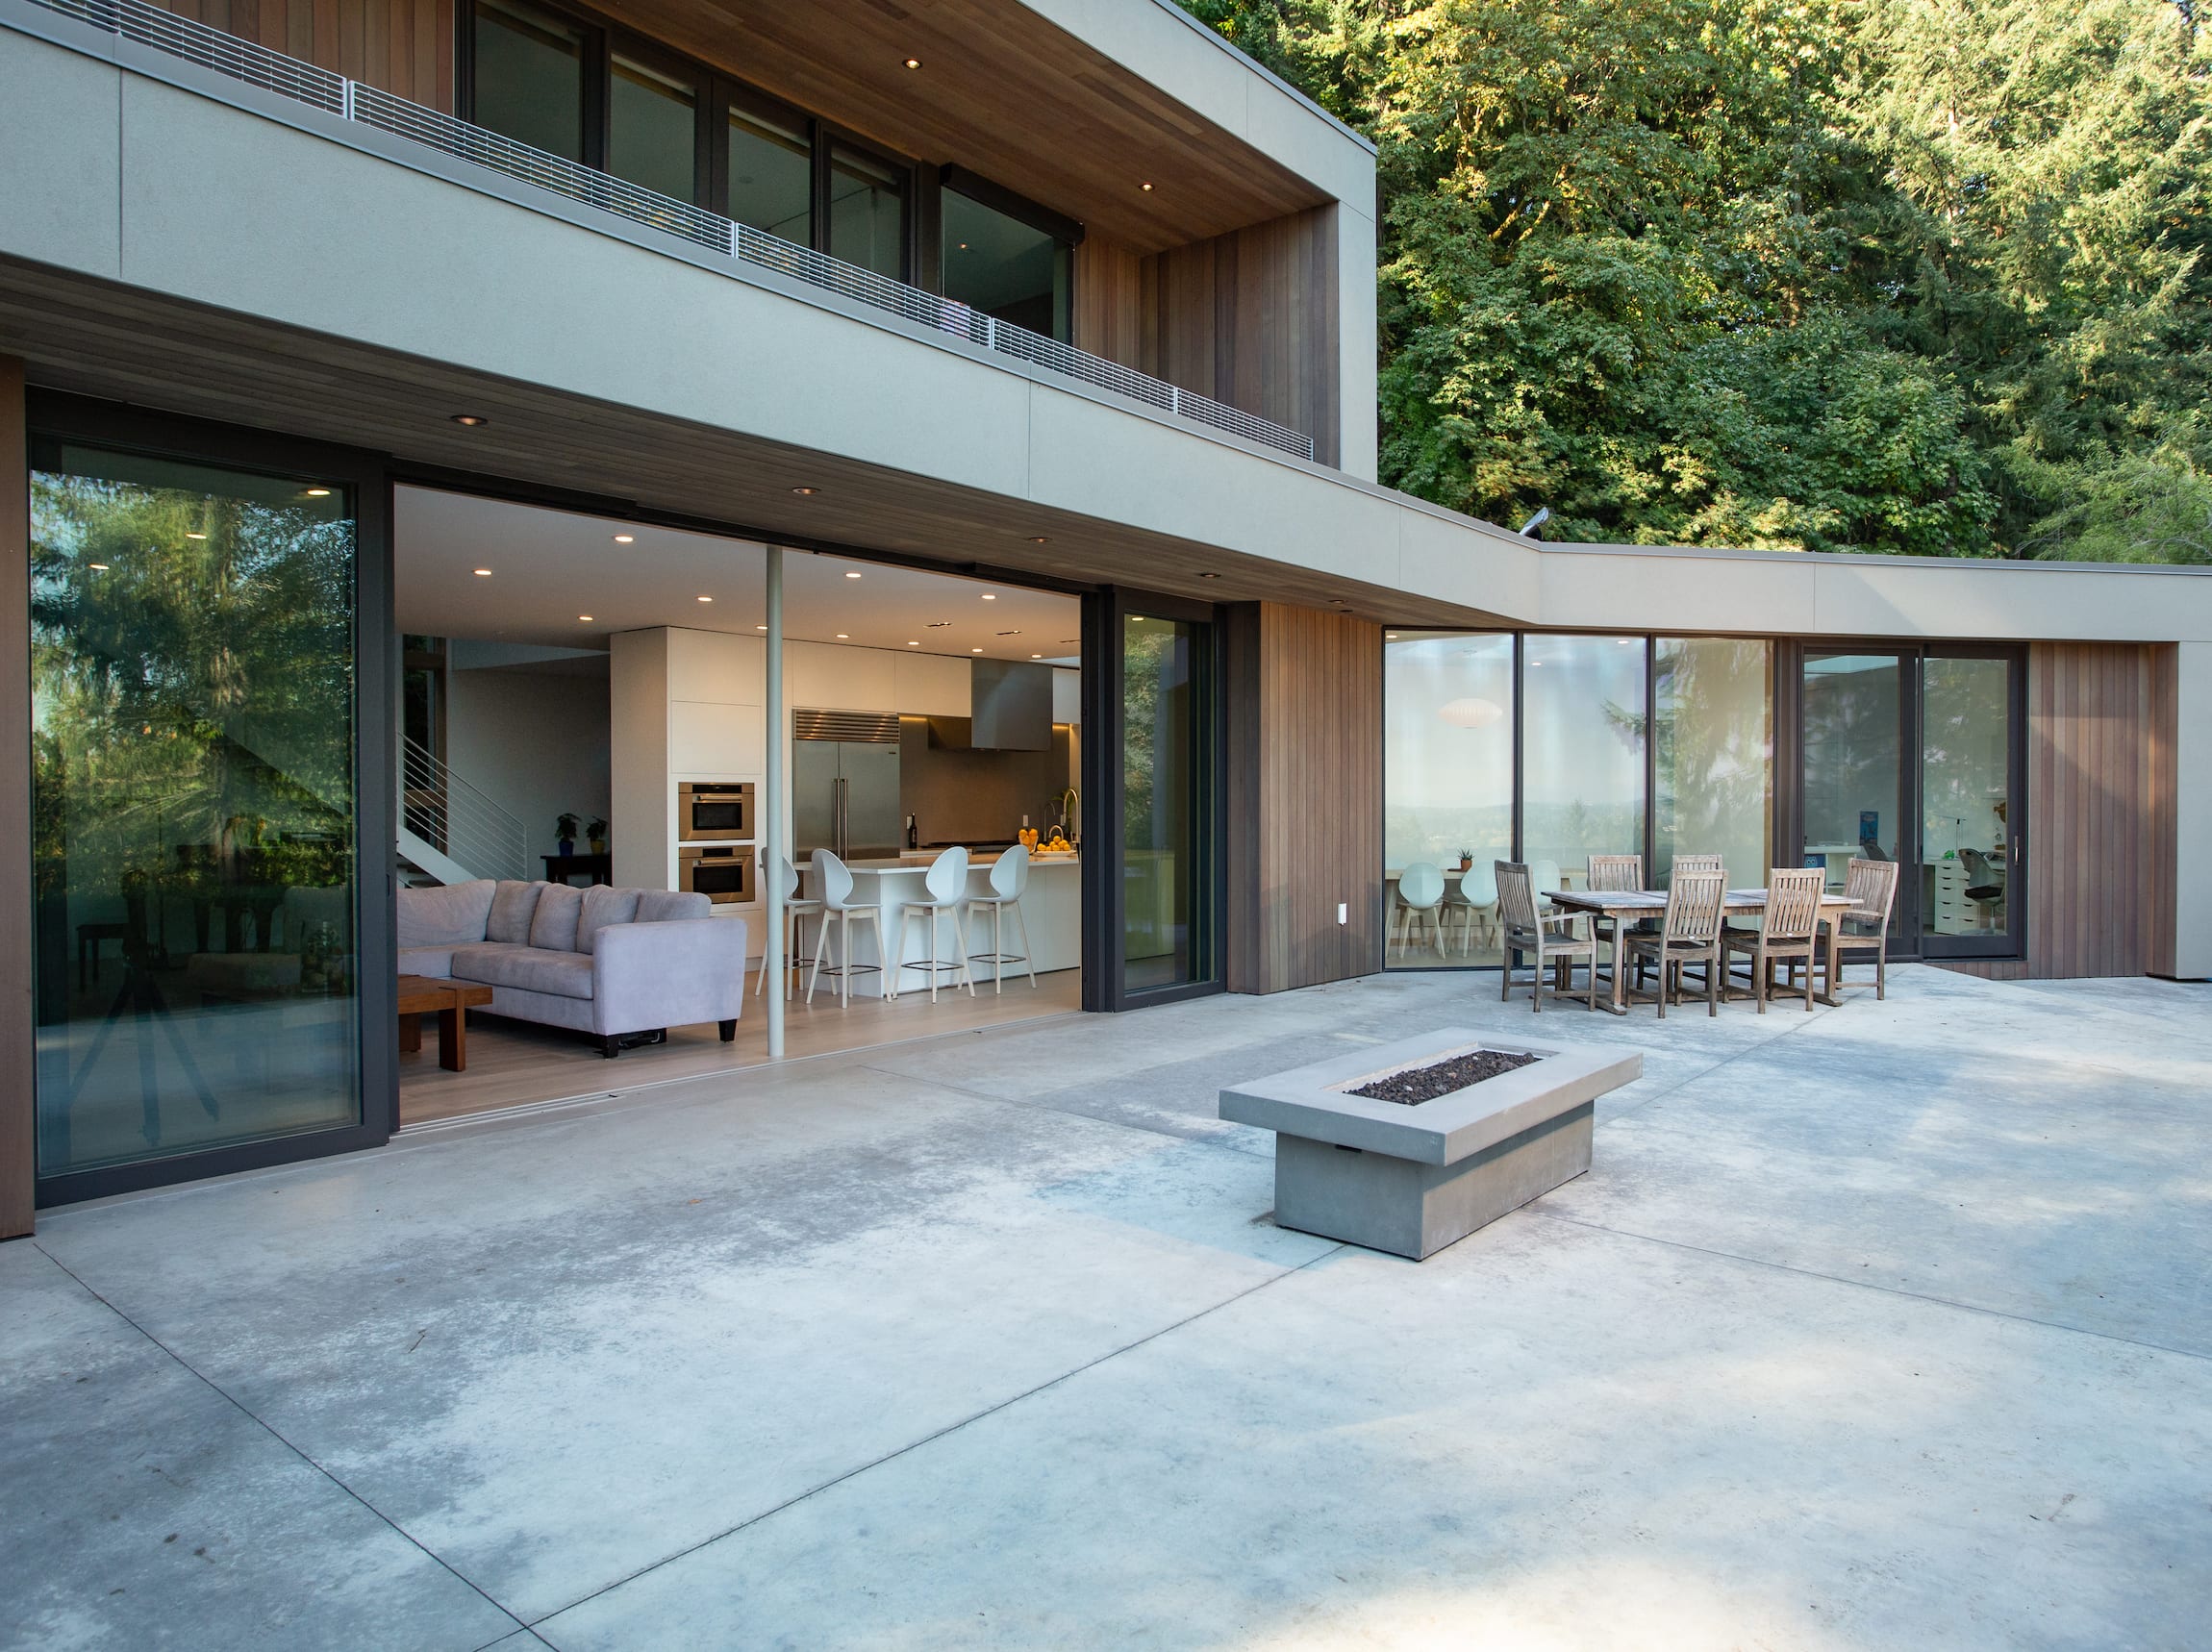 Photo of a luxury home featuring large sliding glass doors